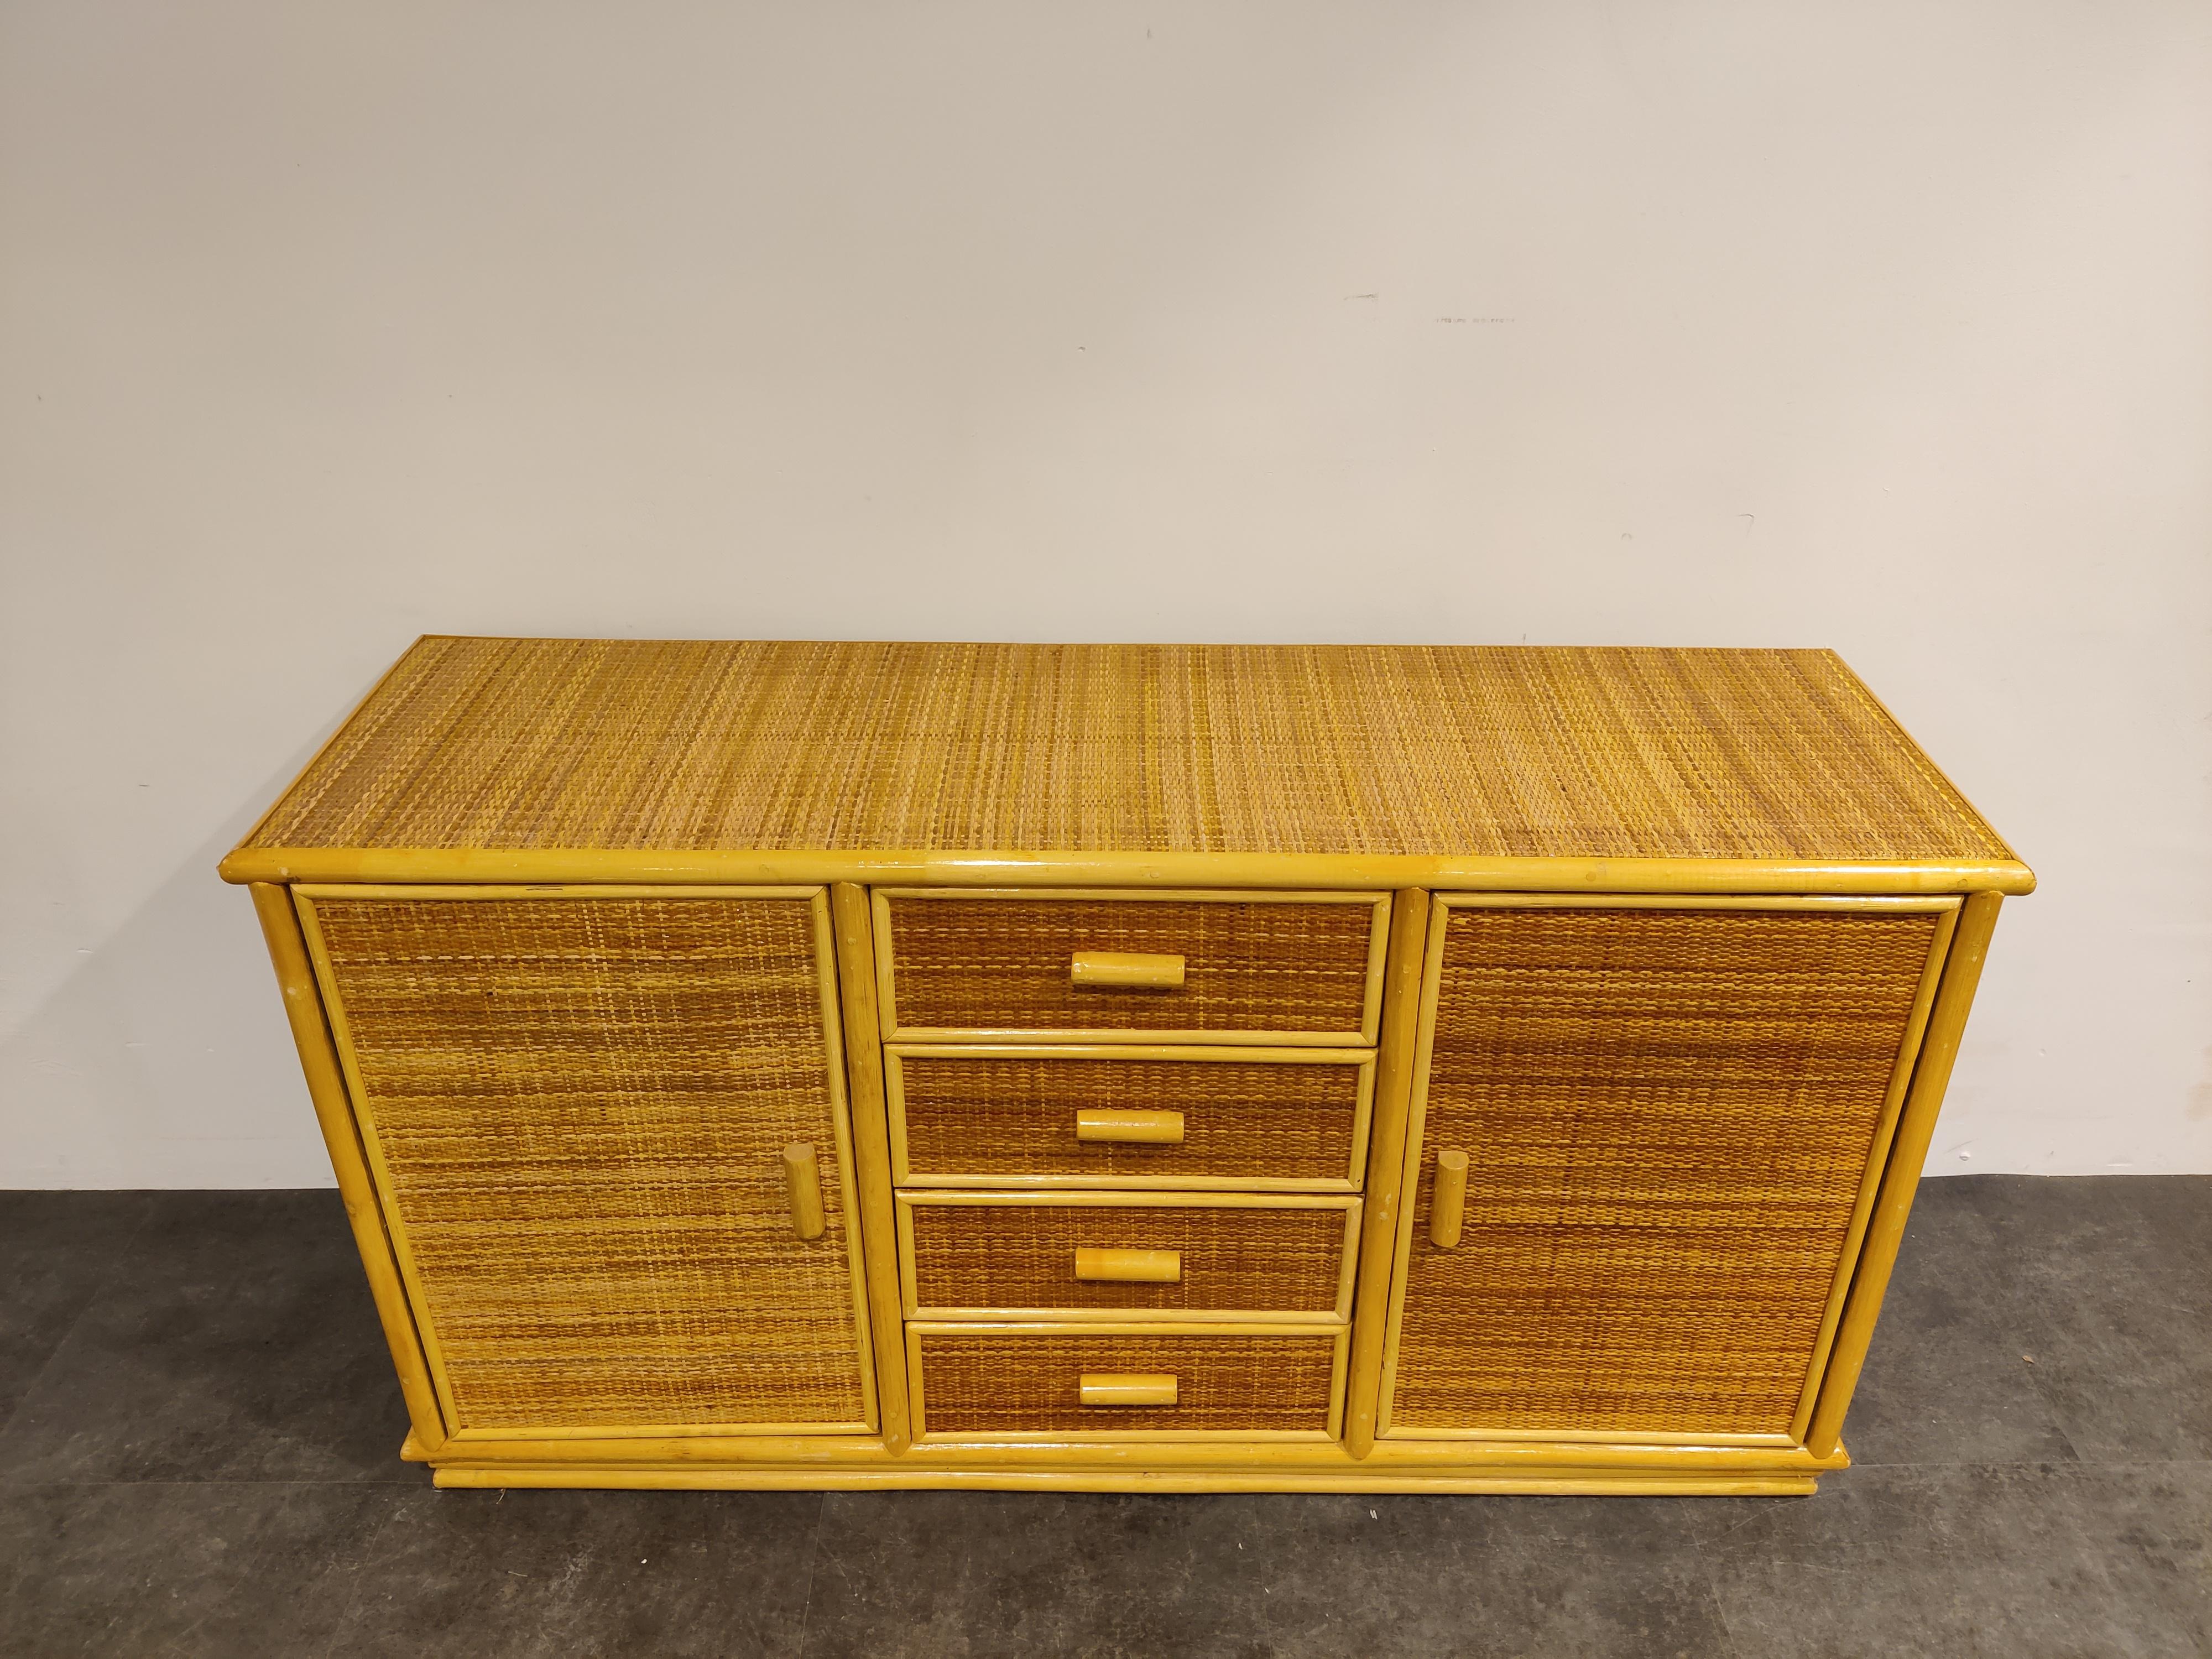 Elegant bohemian style bamboo and rattan sideboard with two doors and four drawers.

Very good condition, good quality sideboard.

1970s - France

Dimensions:

Lenght: 150cm/59.05